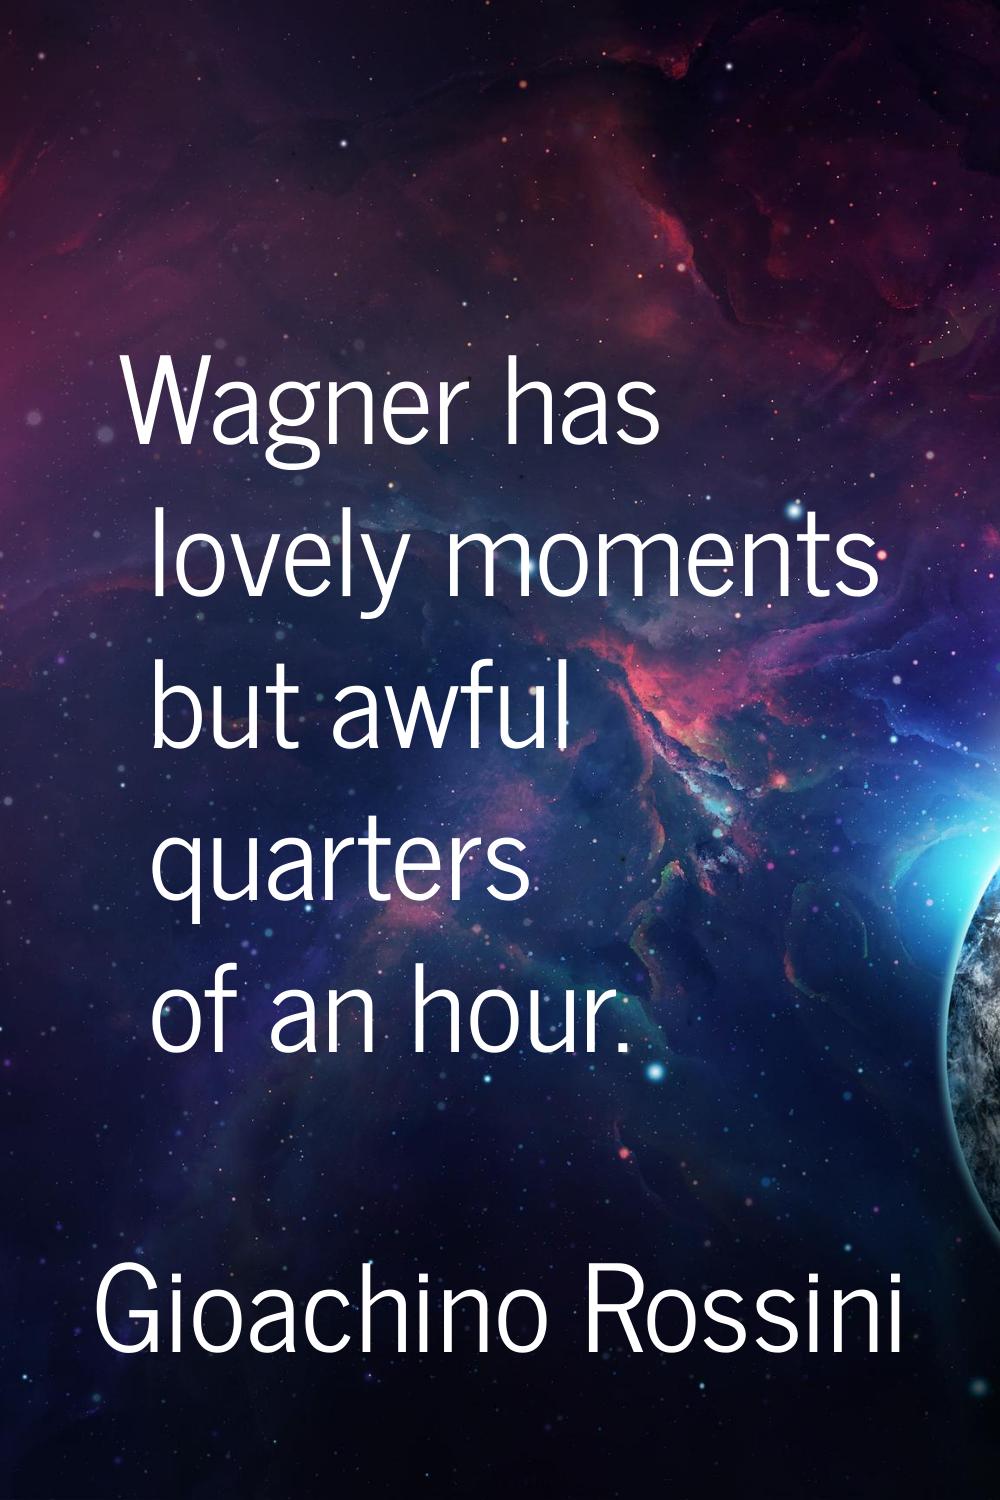 Wagner has lovely moments but awful quarters of an hour.